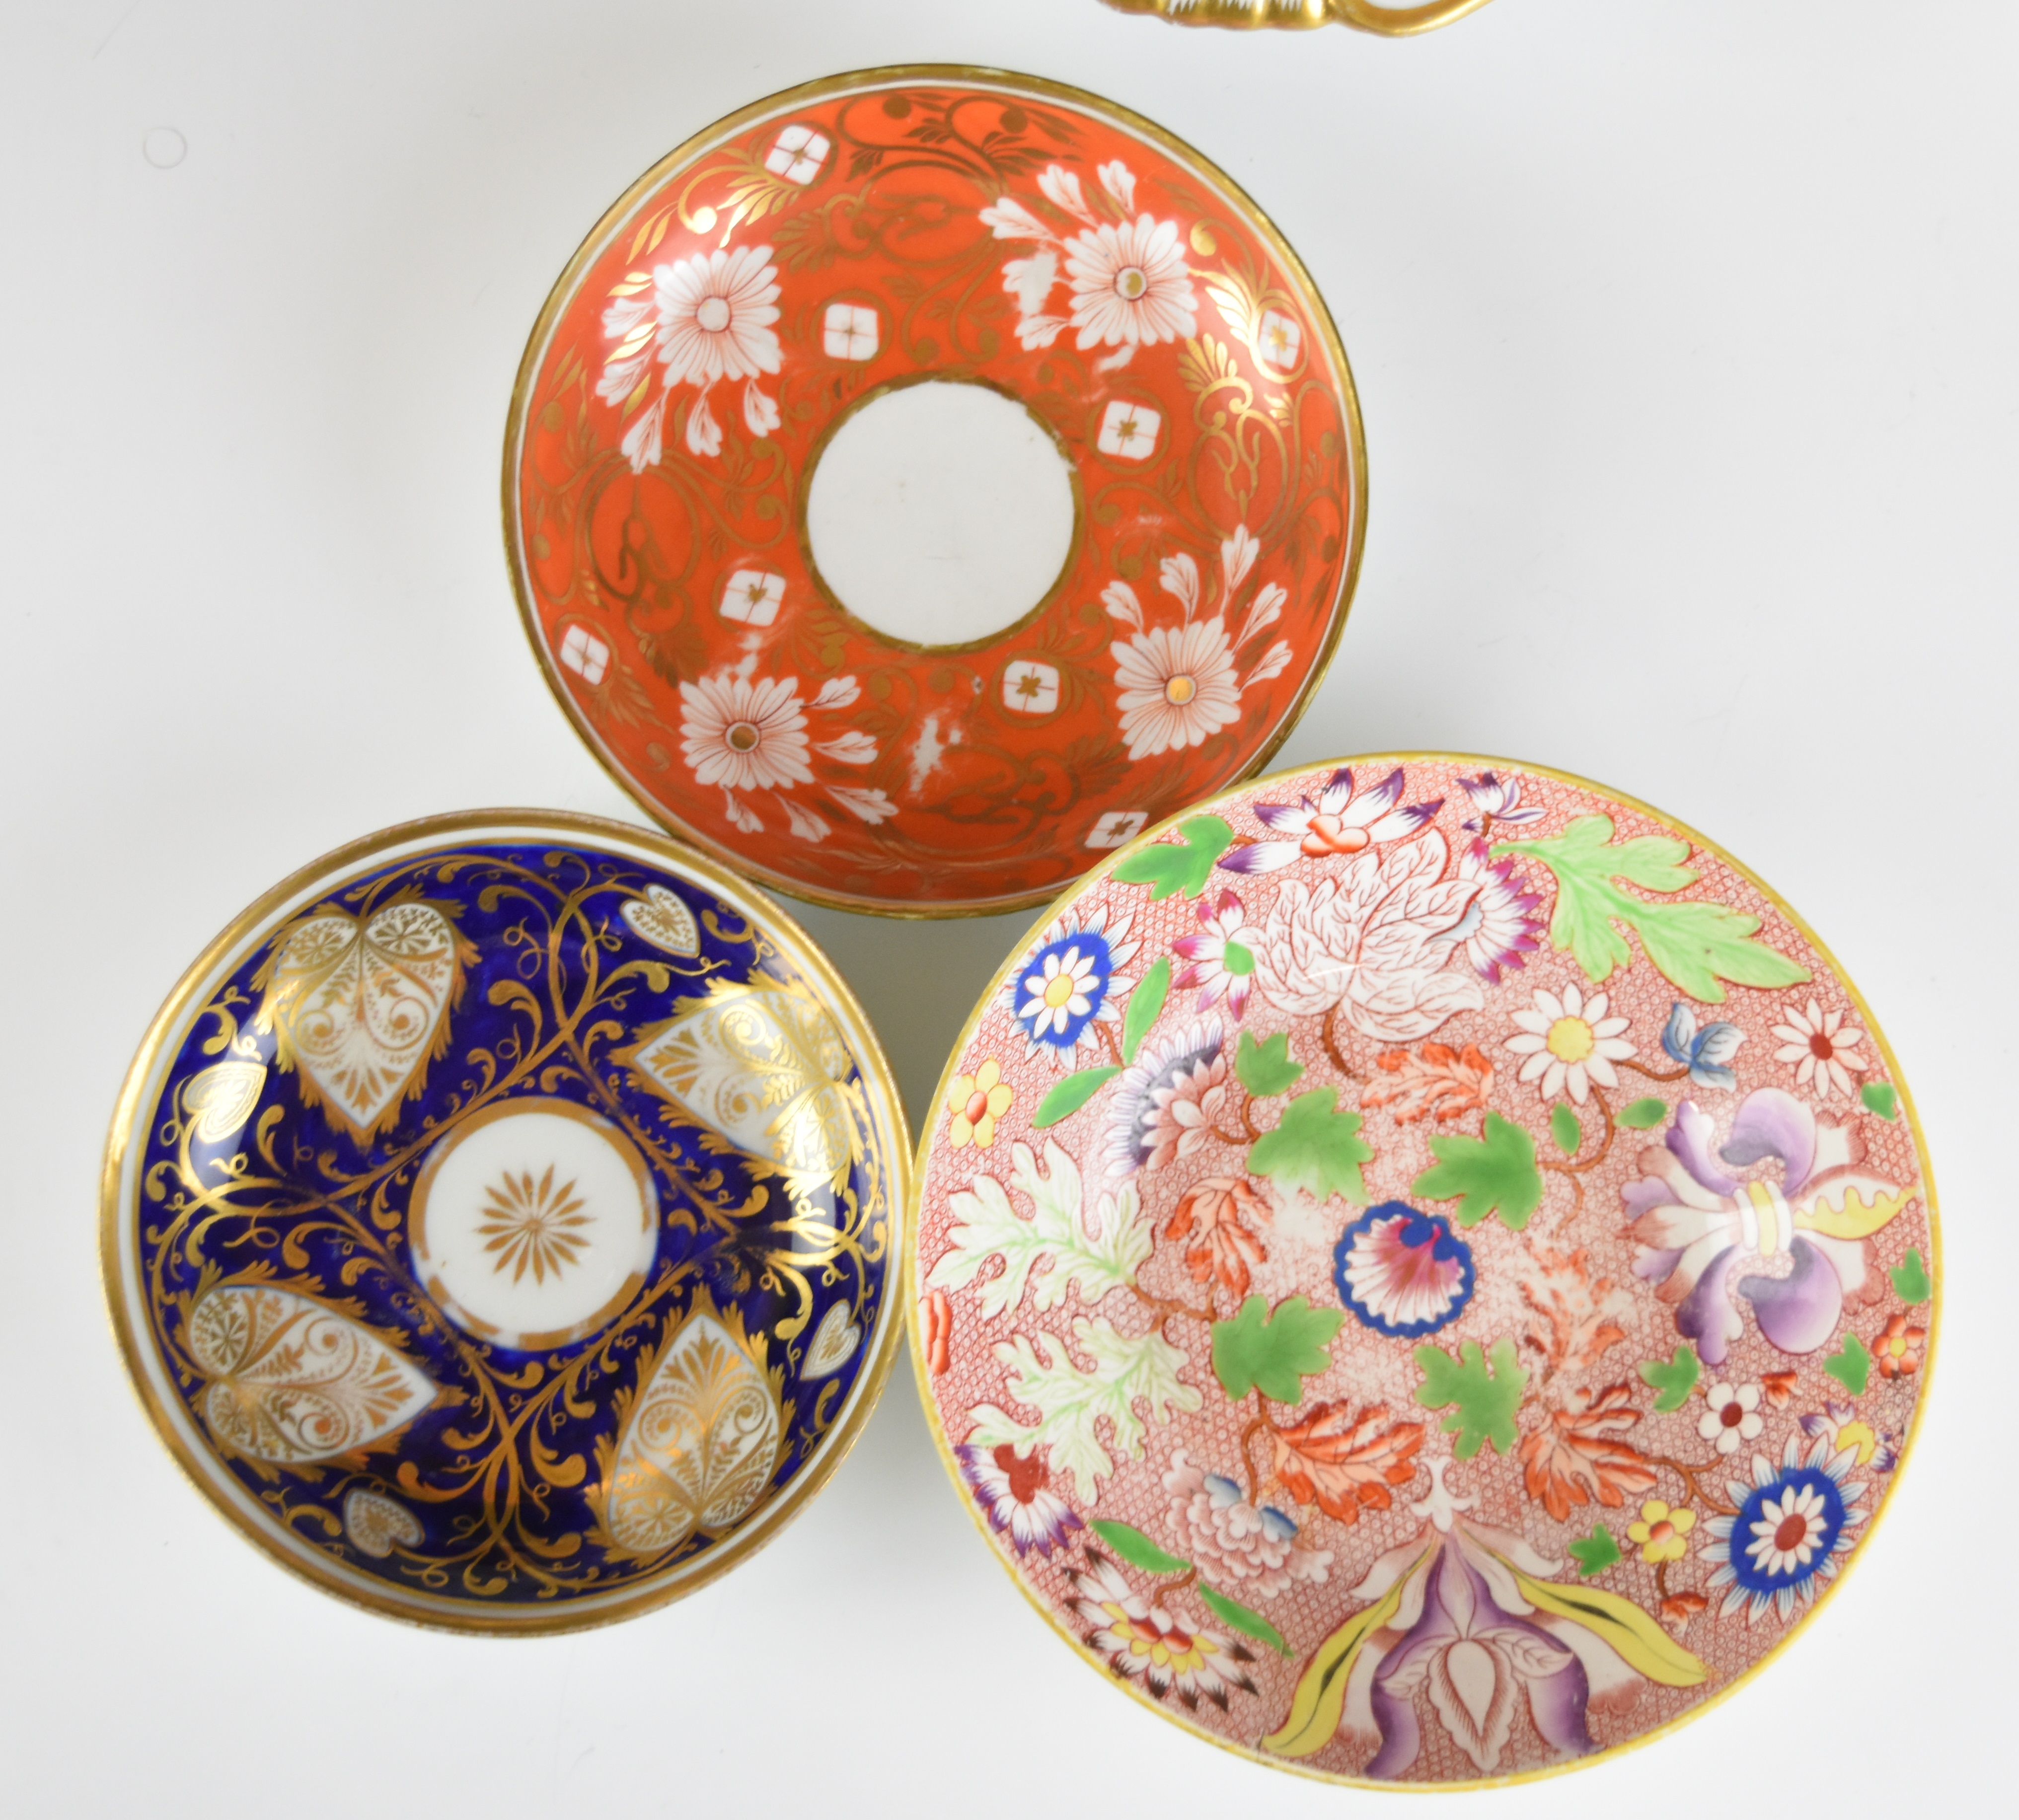 19thC porcelain saucers, dishes, coffee cans and cups including New Hall, Ridgway, bat print - Image 6 of 22